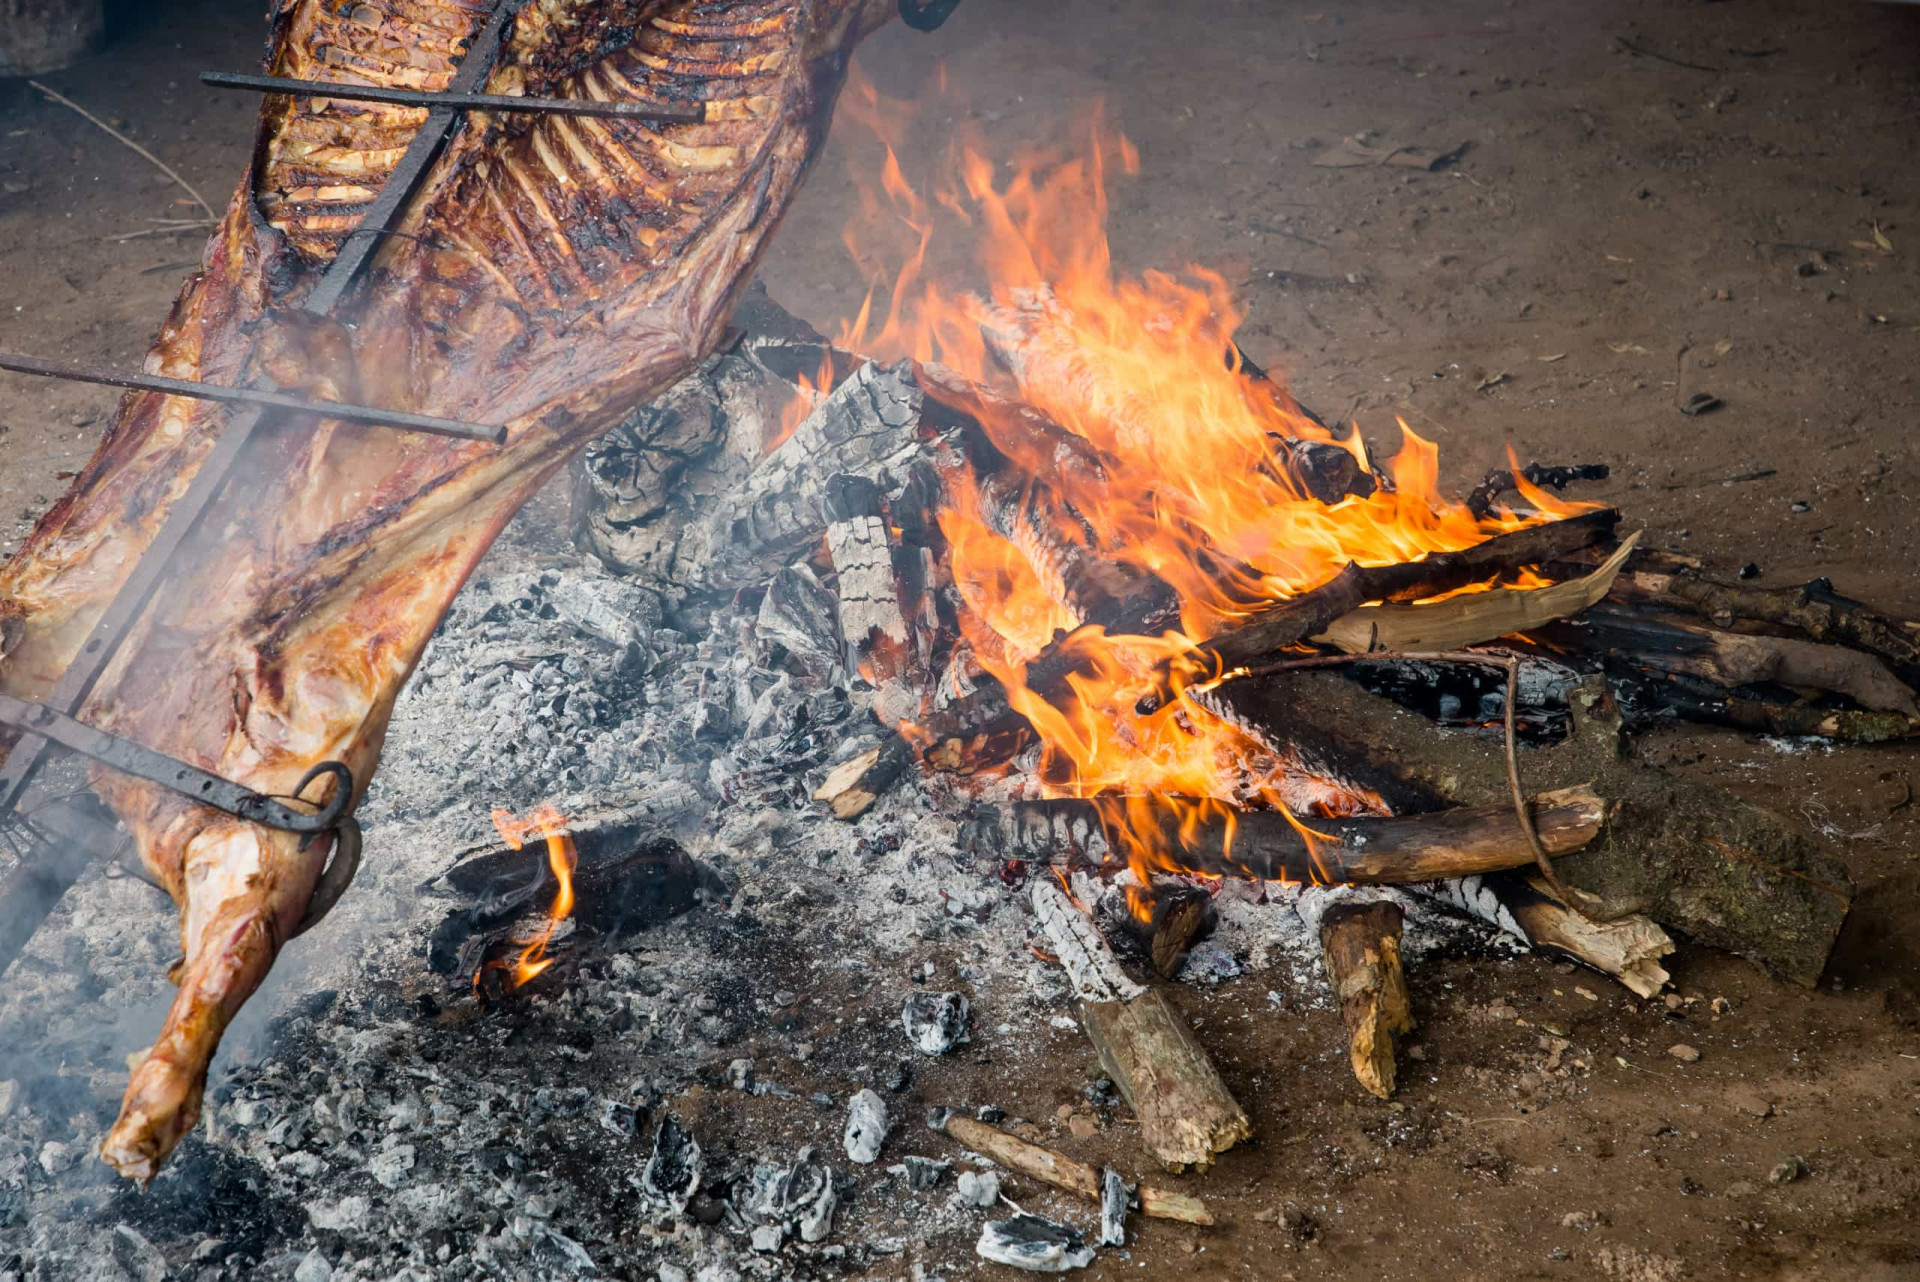 The cuisine in Patagonia is hearty and rugged. A famous dish is the <em>asado</em>, where an animal is cut through the middle and roasted whole on an open fire. It can't really get fresher than that. <p>Sources: (Mental Floss) (The Guardian) (Lonely Planet)</p> <p>See also:<a href="https://www.starsinsider.com/travel/194264/the-most-beautiful-national-parks-in-the-world">The most beautiful national parks in the world</a></p><p><a href="https://www.msn.com/en-us/community/channel/vid-7xx8mnucu55yw63we9va2gwr7uihbxwc68fxqp25x6tg4ftibpra?cvid=94631541bc0f4f89bfd59158d696ad7e">Follow us and access great exclusive content every day</a></p>